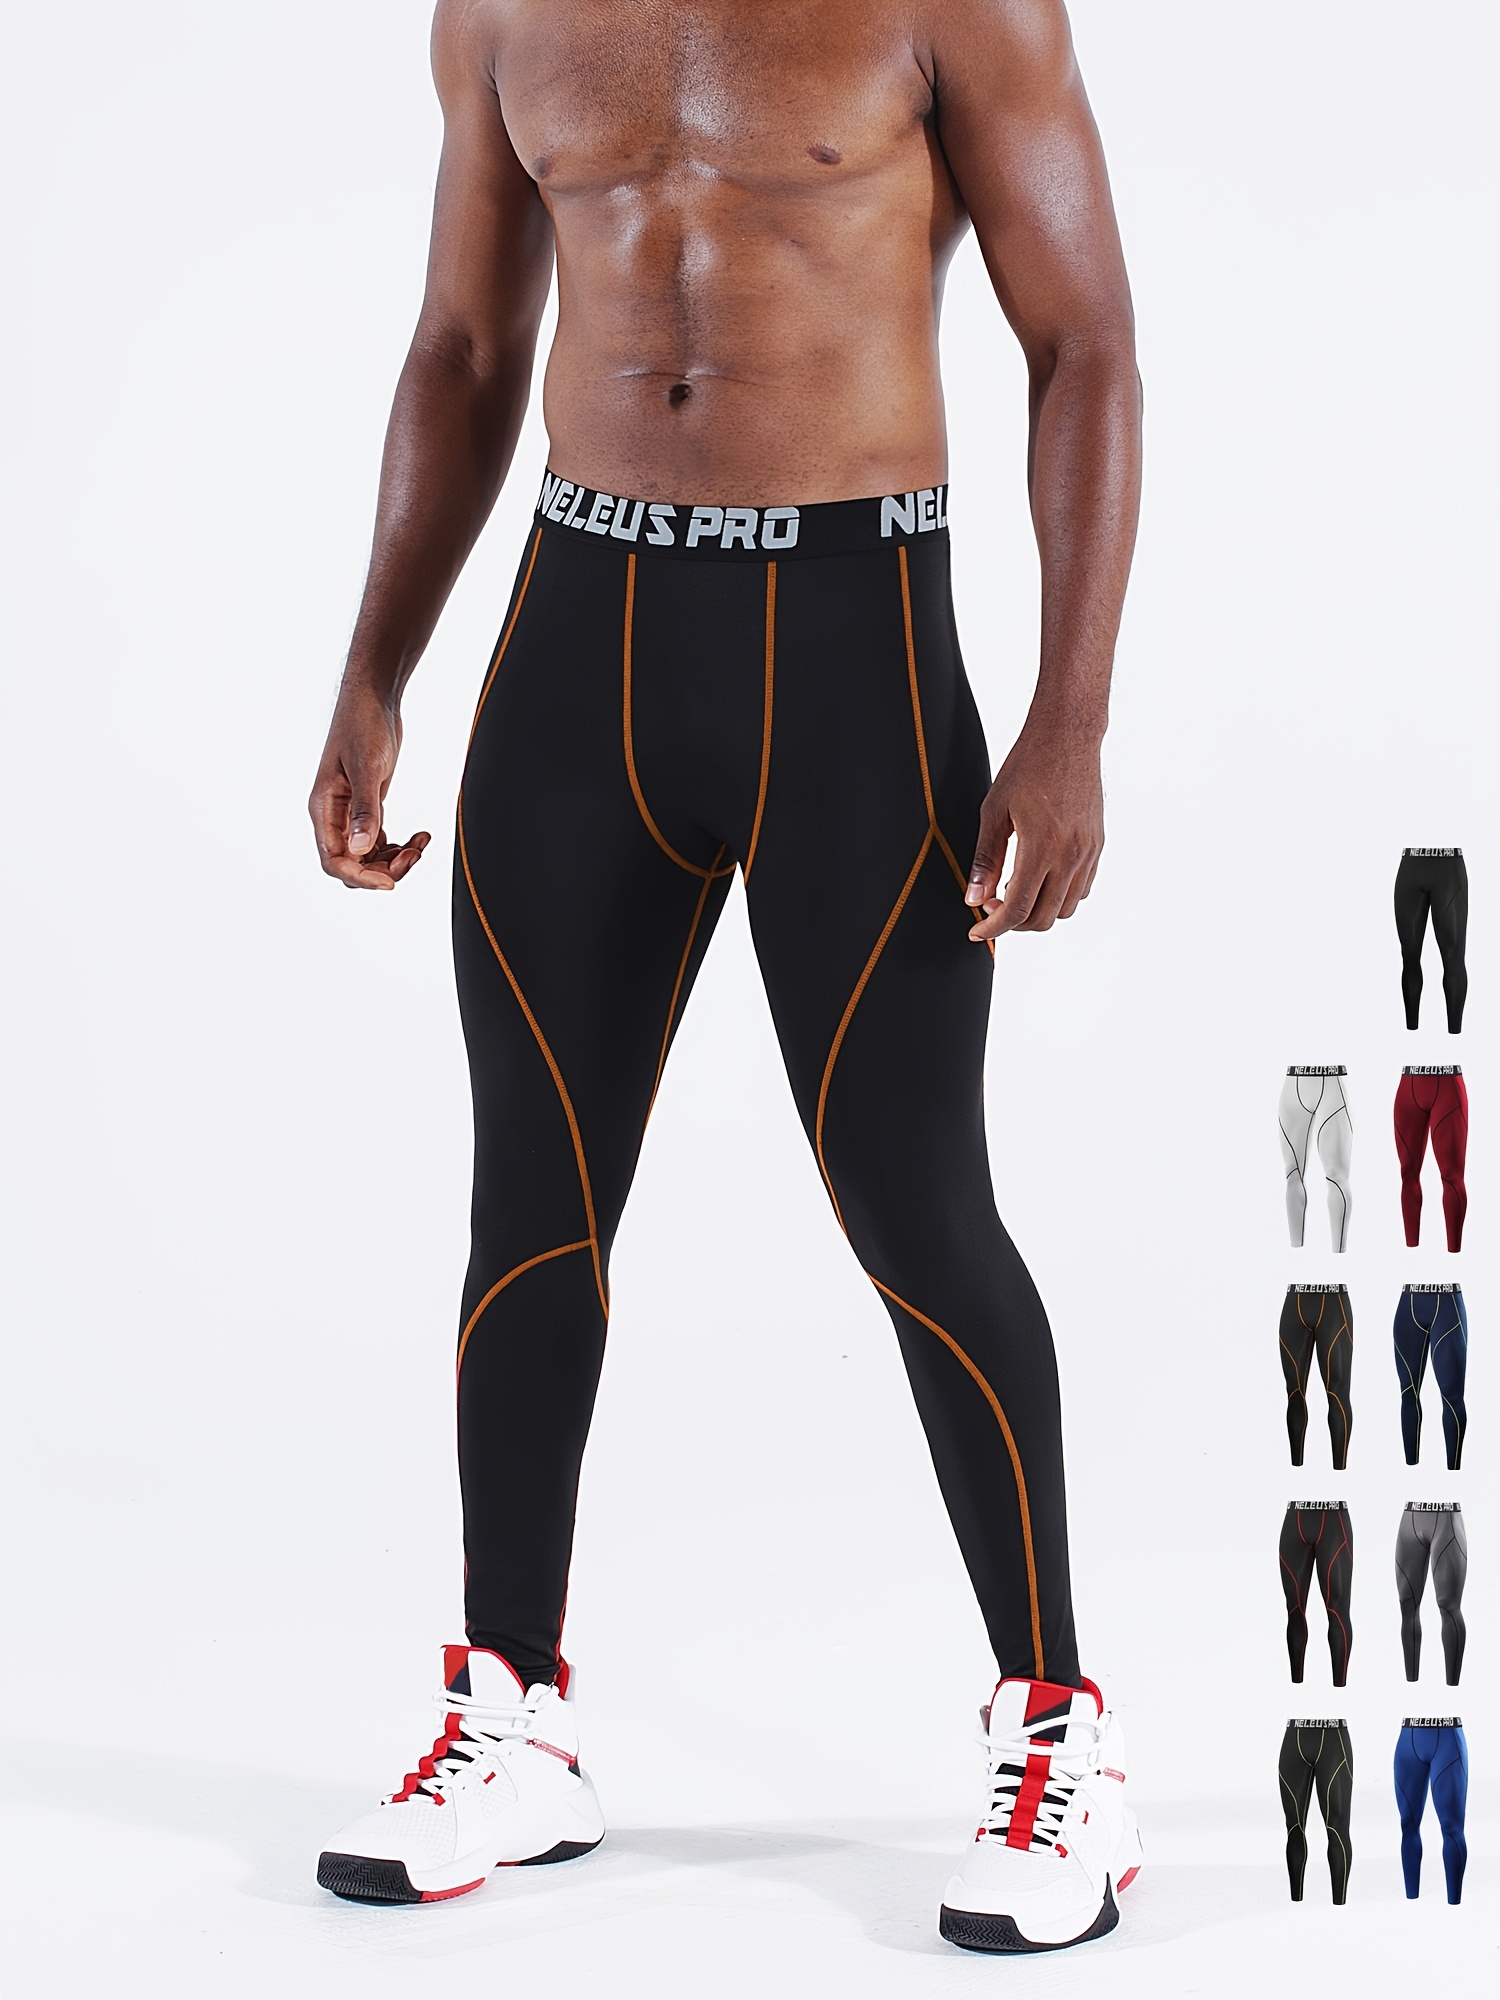 NELEUS Men's Dry Fit High Flexibility Compression Pants Workout Running  Leggings, Suitable For Yoga, Exercise, Fitness,Basketball Training